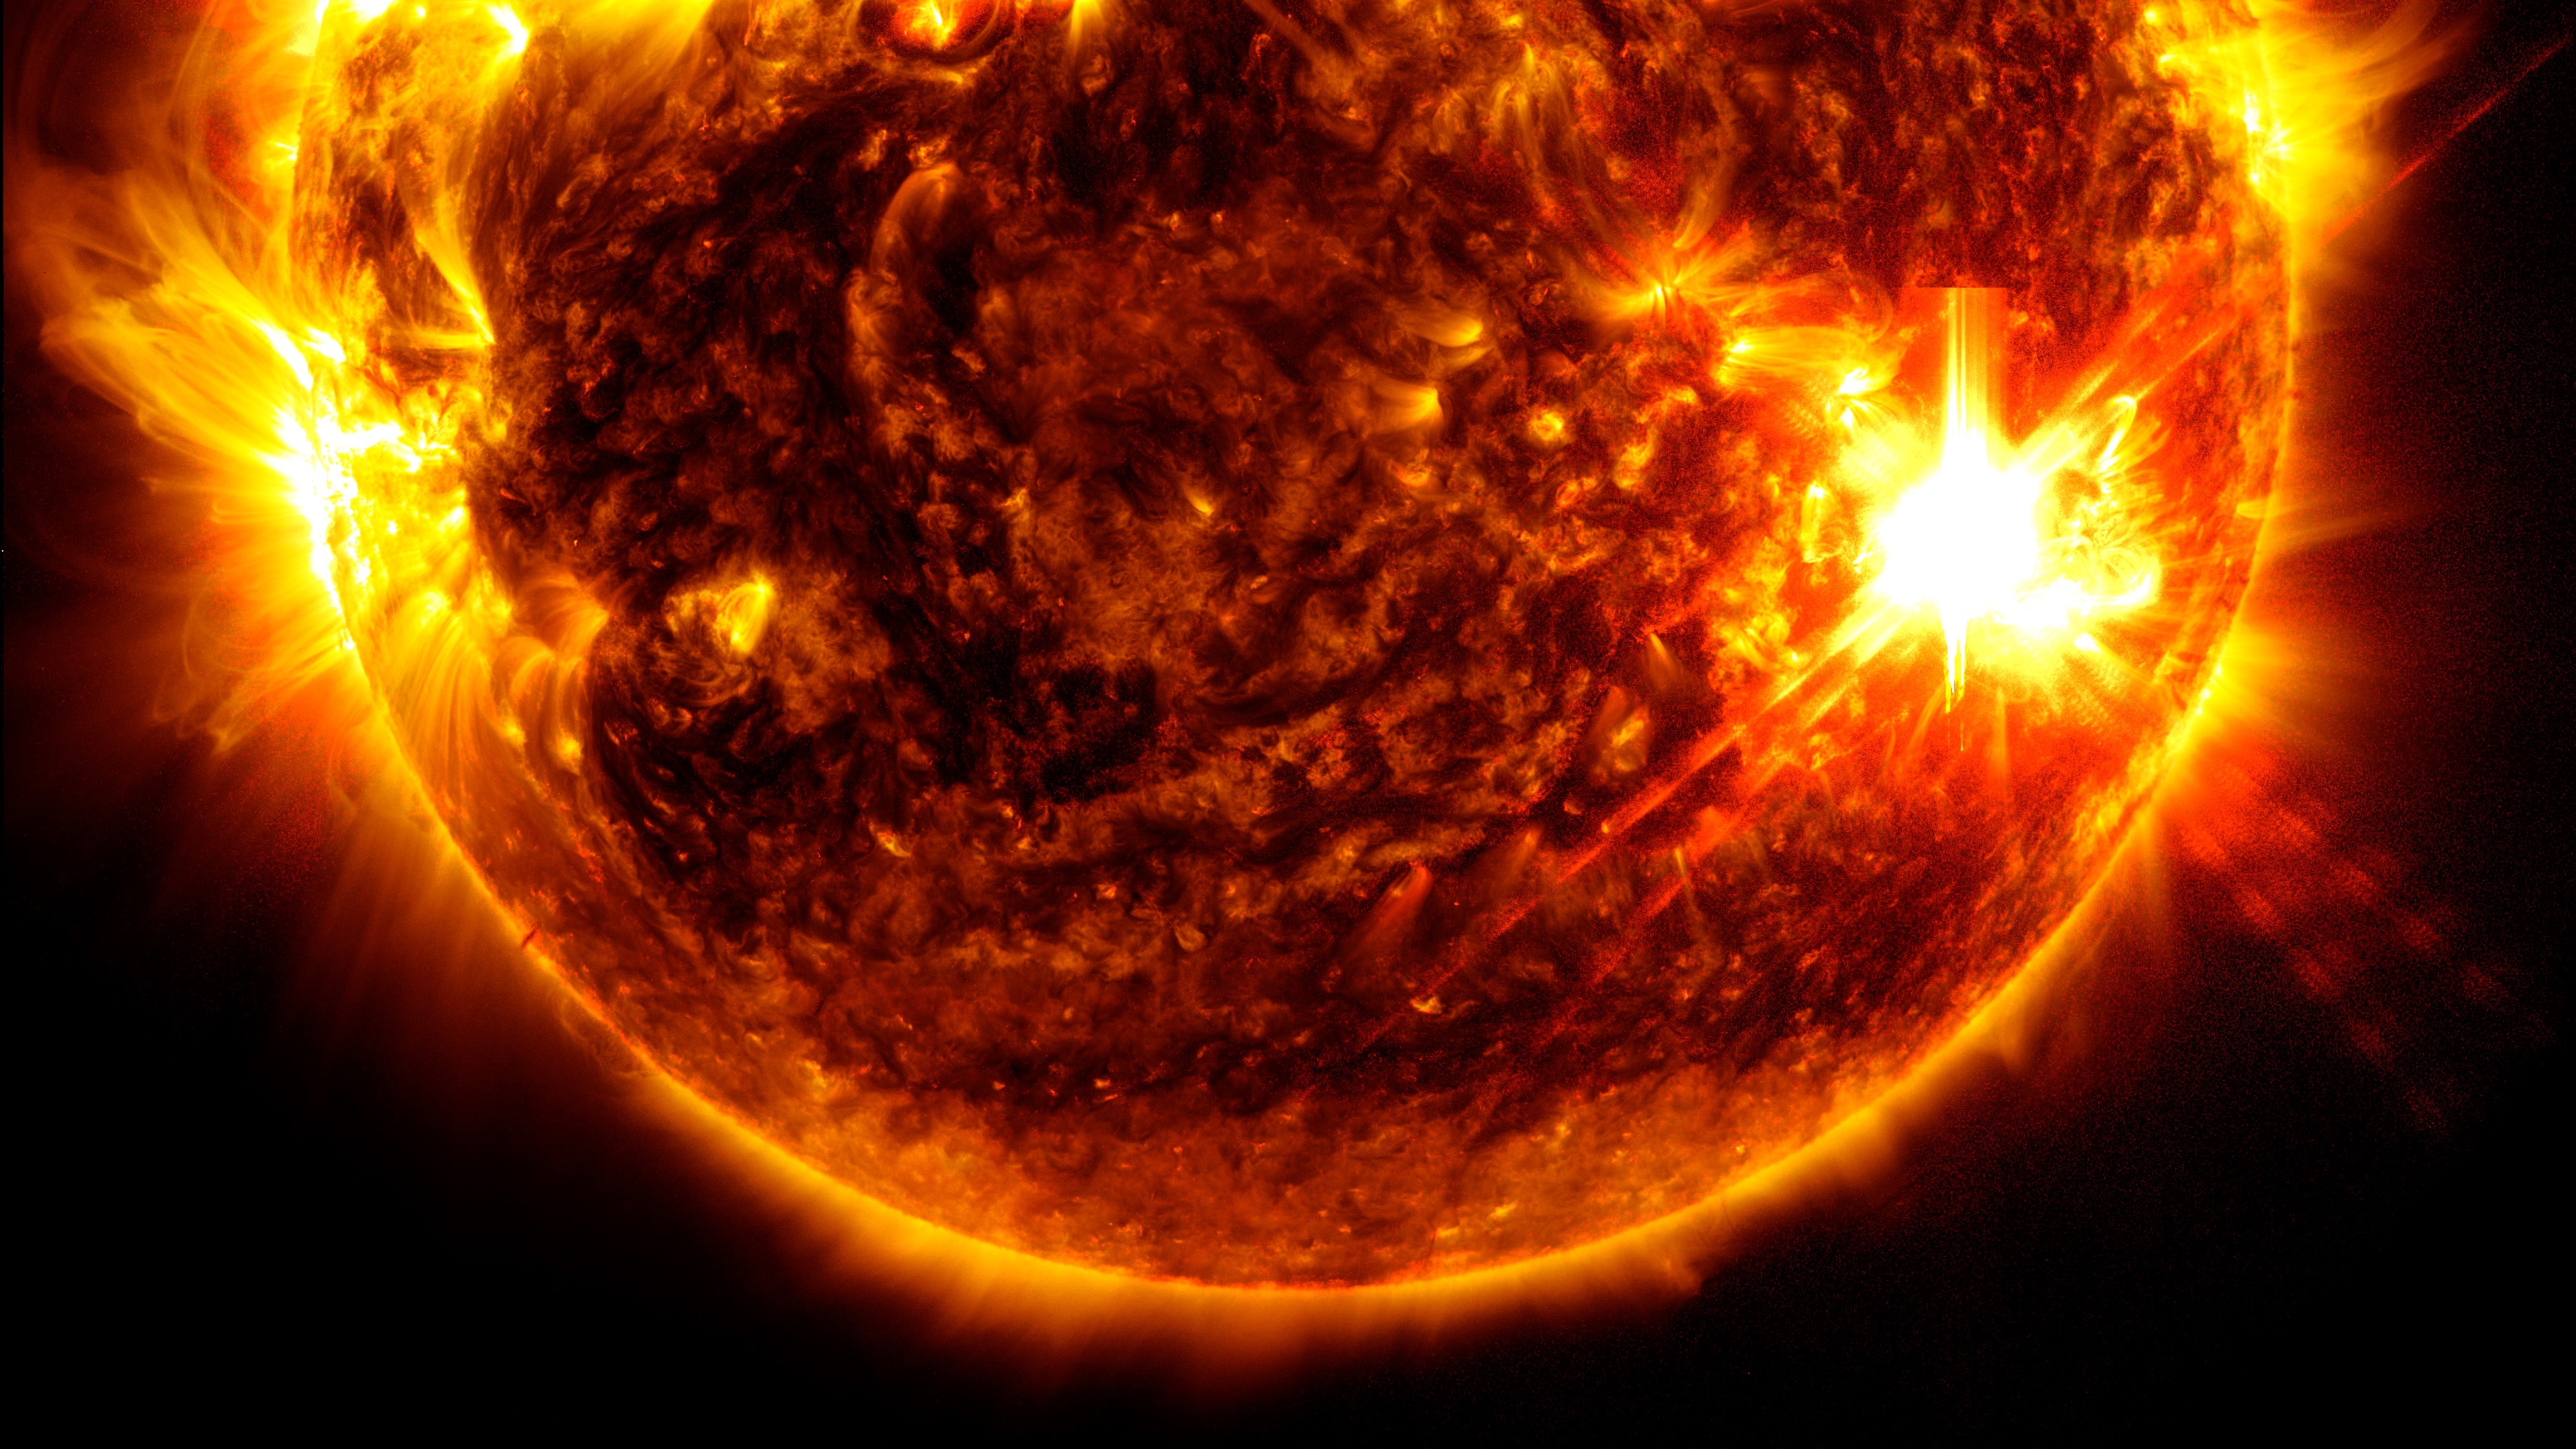 India's space agency has been carefully watching our sun's solar tantrums thumbnail